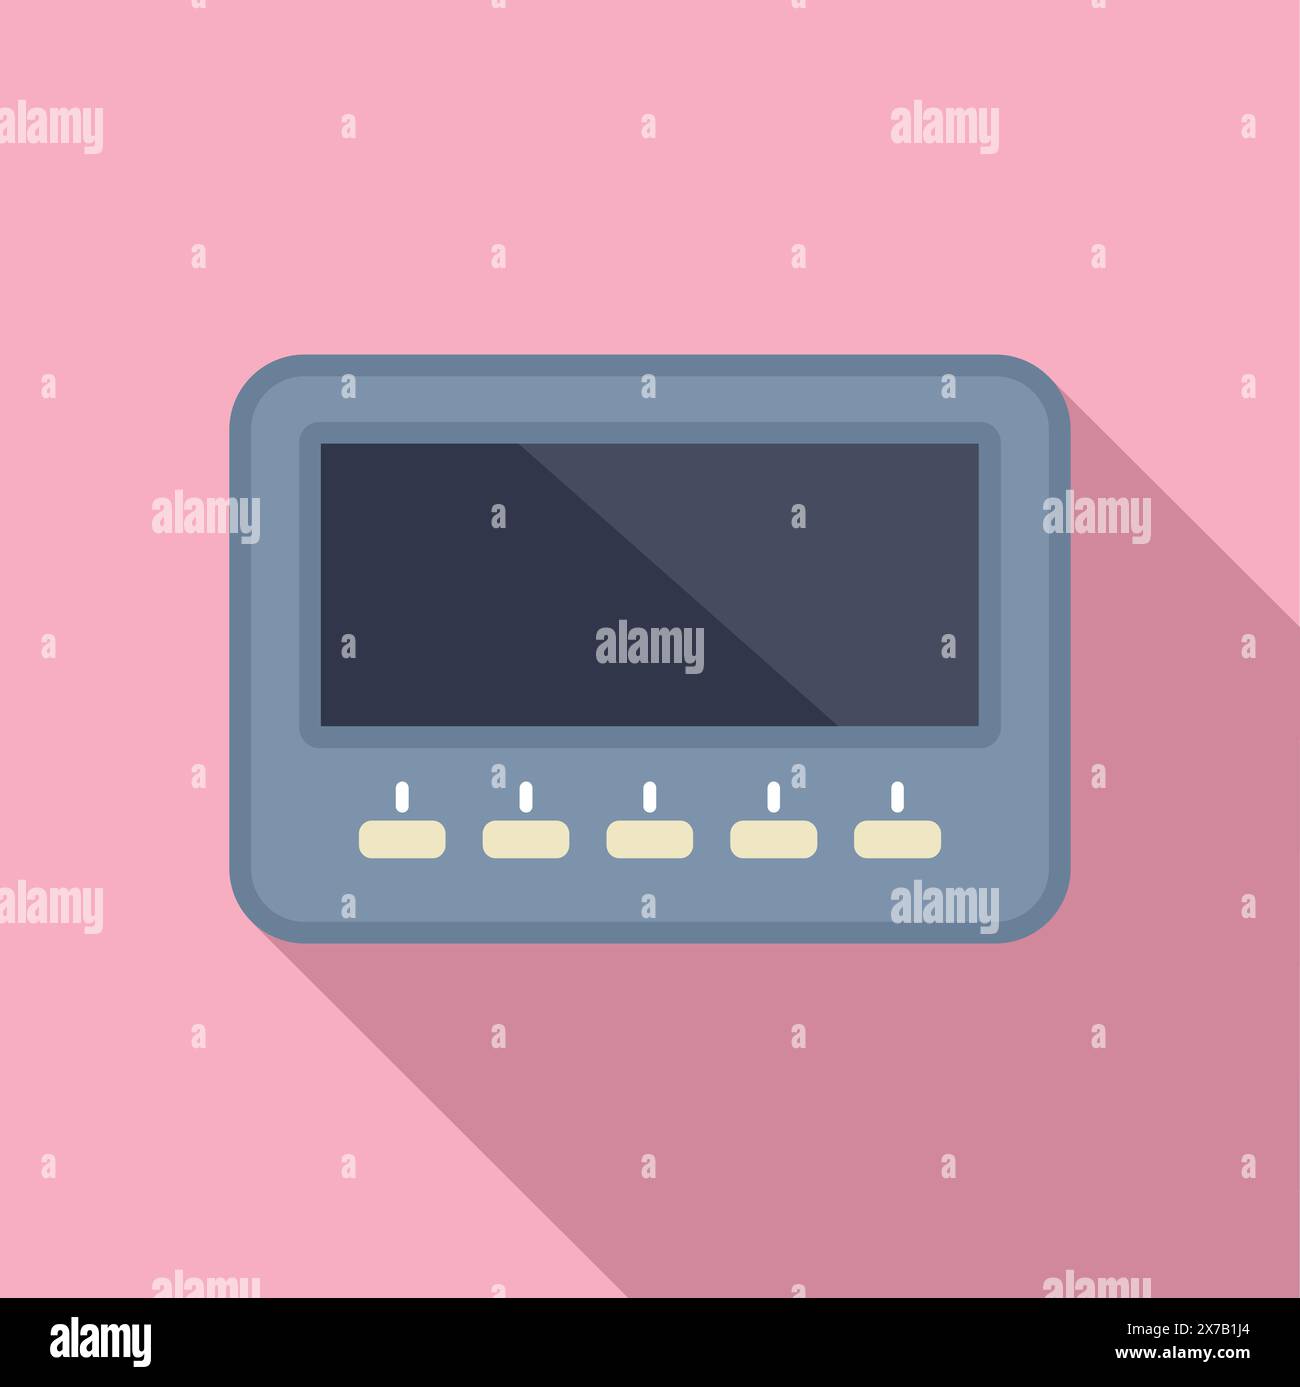 Flat design vector of a classic handheld gaming device on a pink background Stock Vector